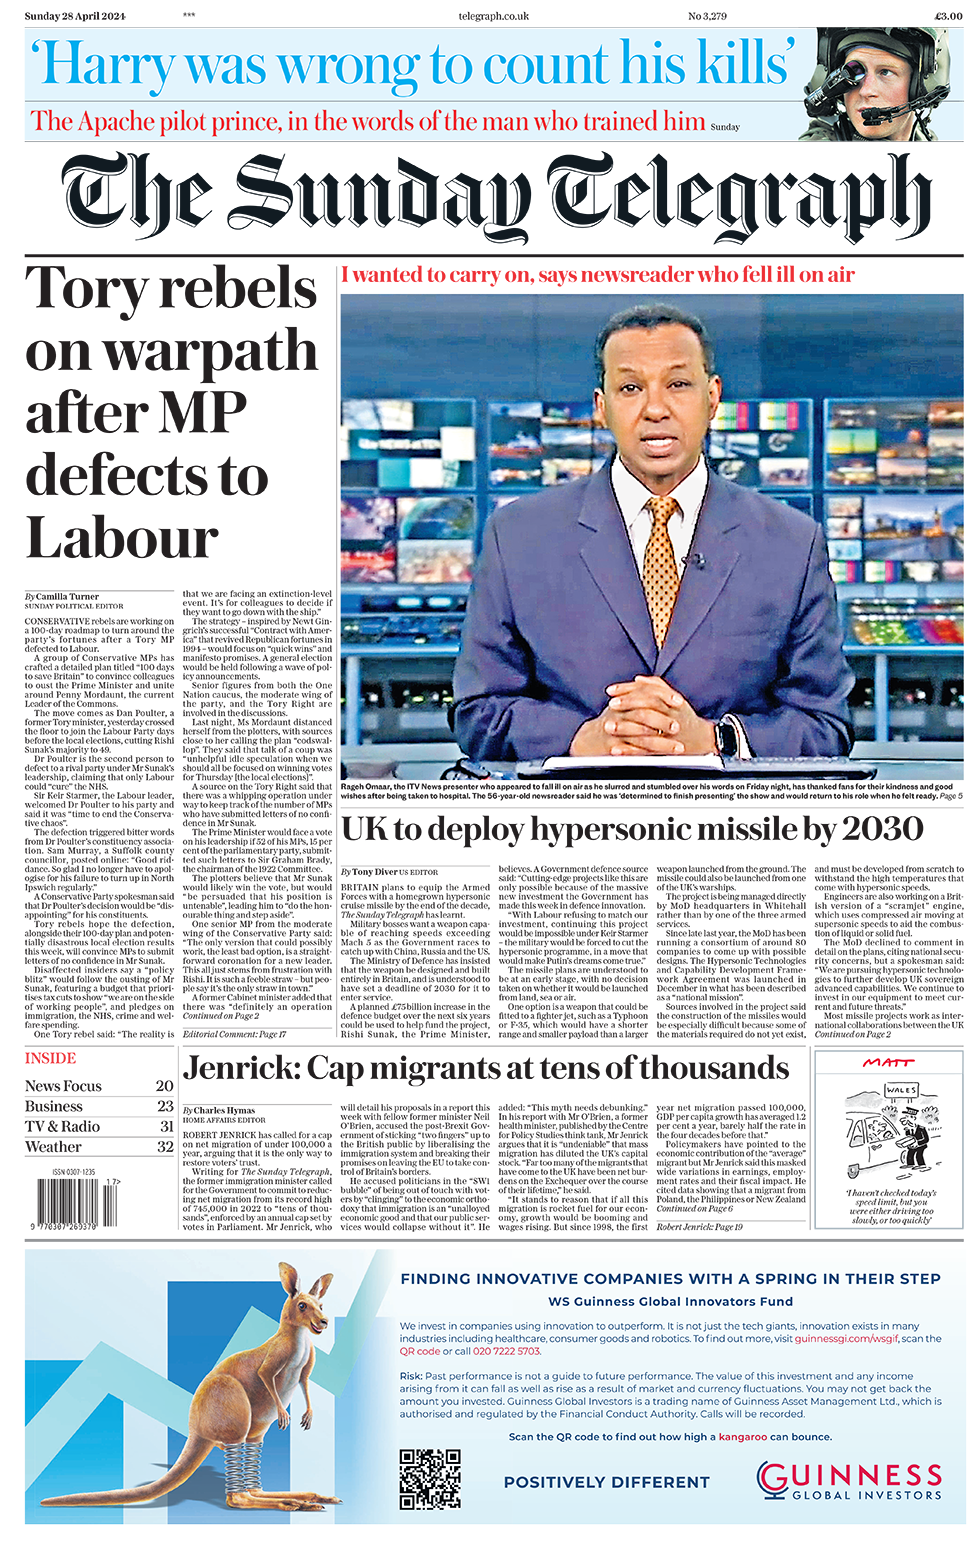 The headline in the Telegraph reads: "Tory rebels on warpath after MP defects to Labour".